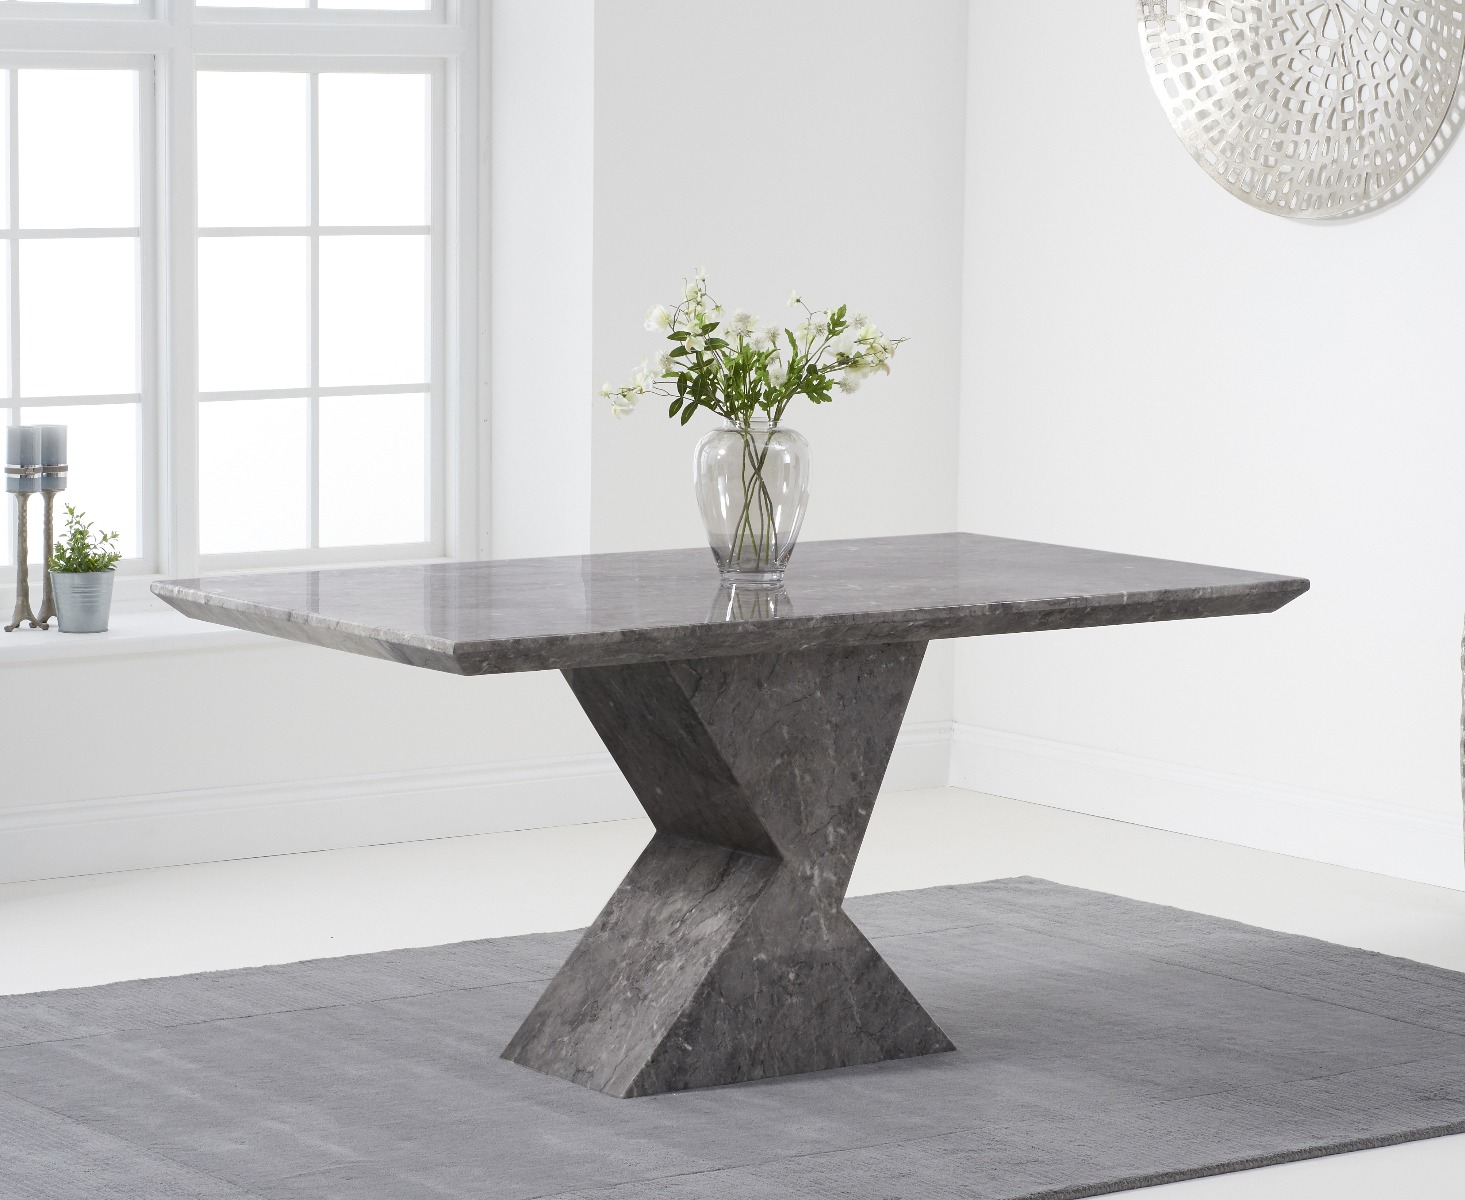 Photo 2 of Aaron 160cm grey marble dining table with 4 white aldo chairs